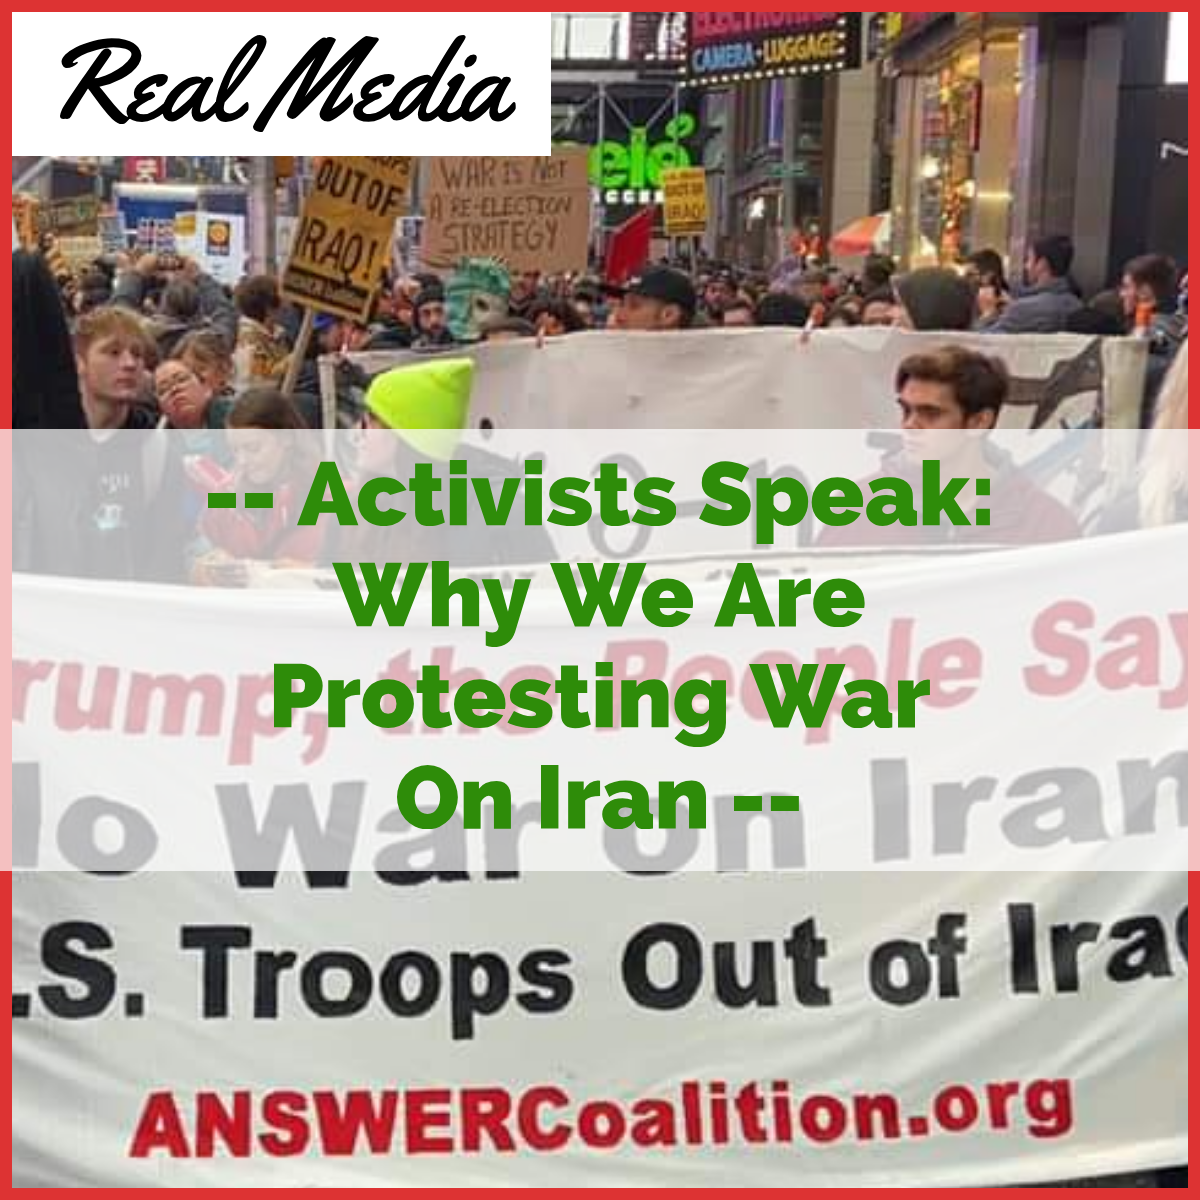 Activists Speak: Why We Are Protesting Against a War on Iran